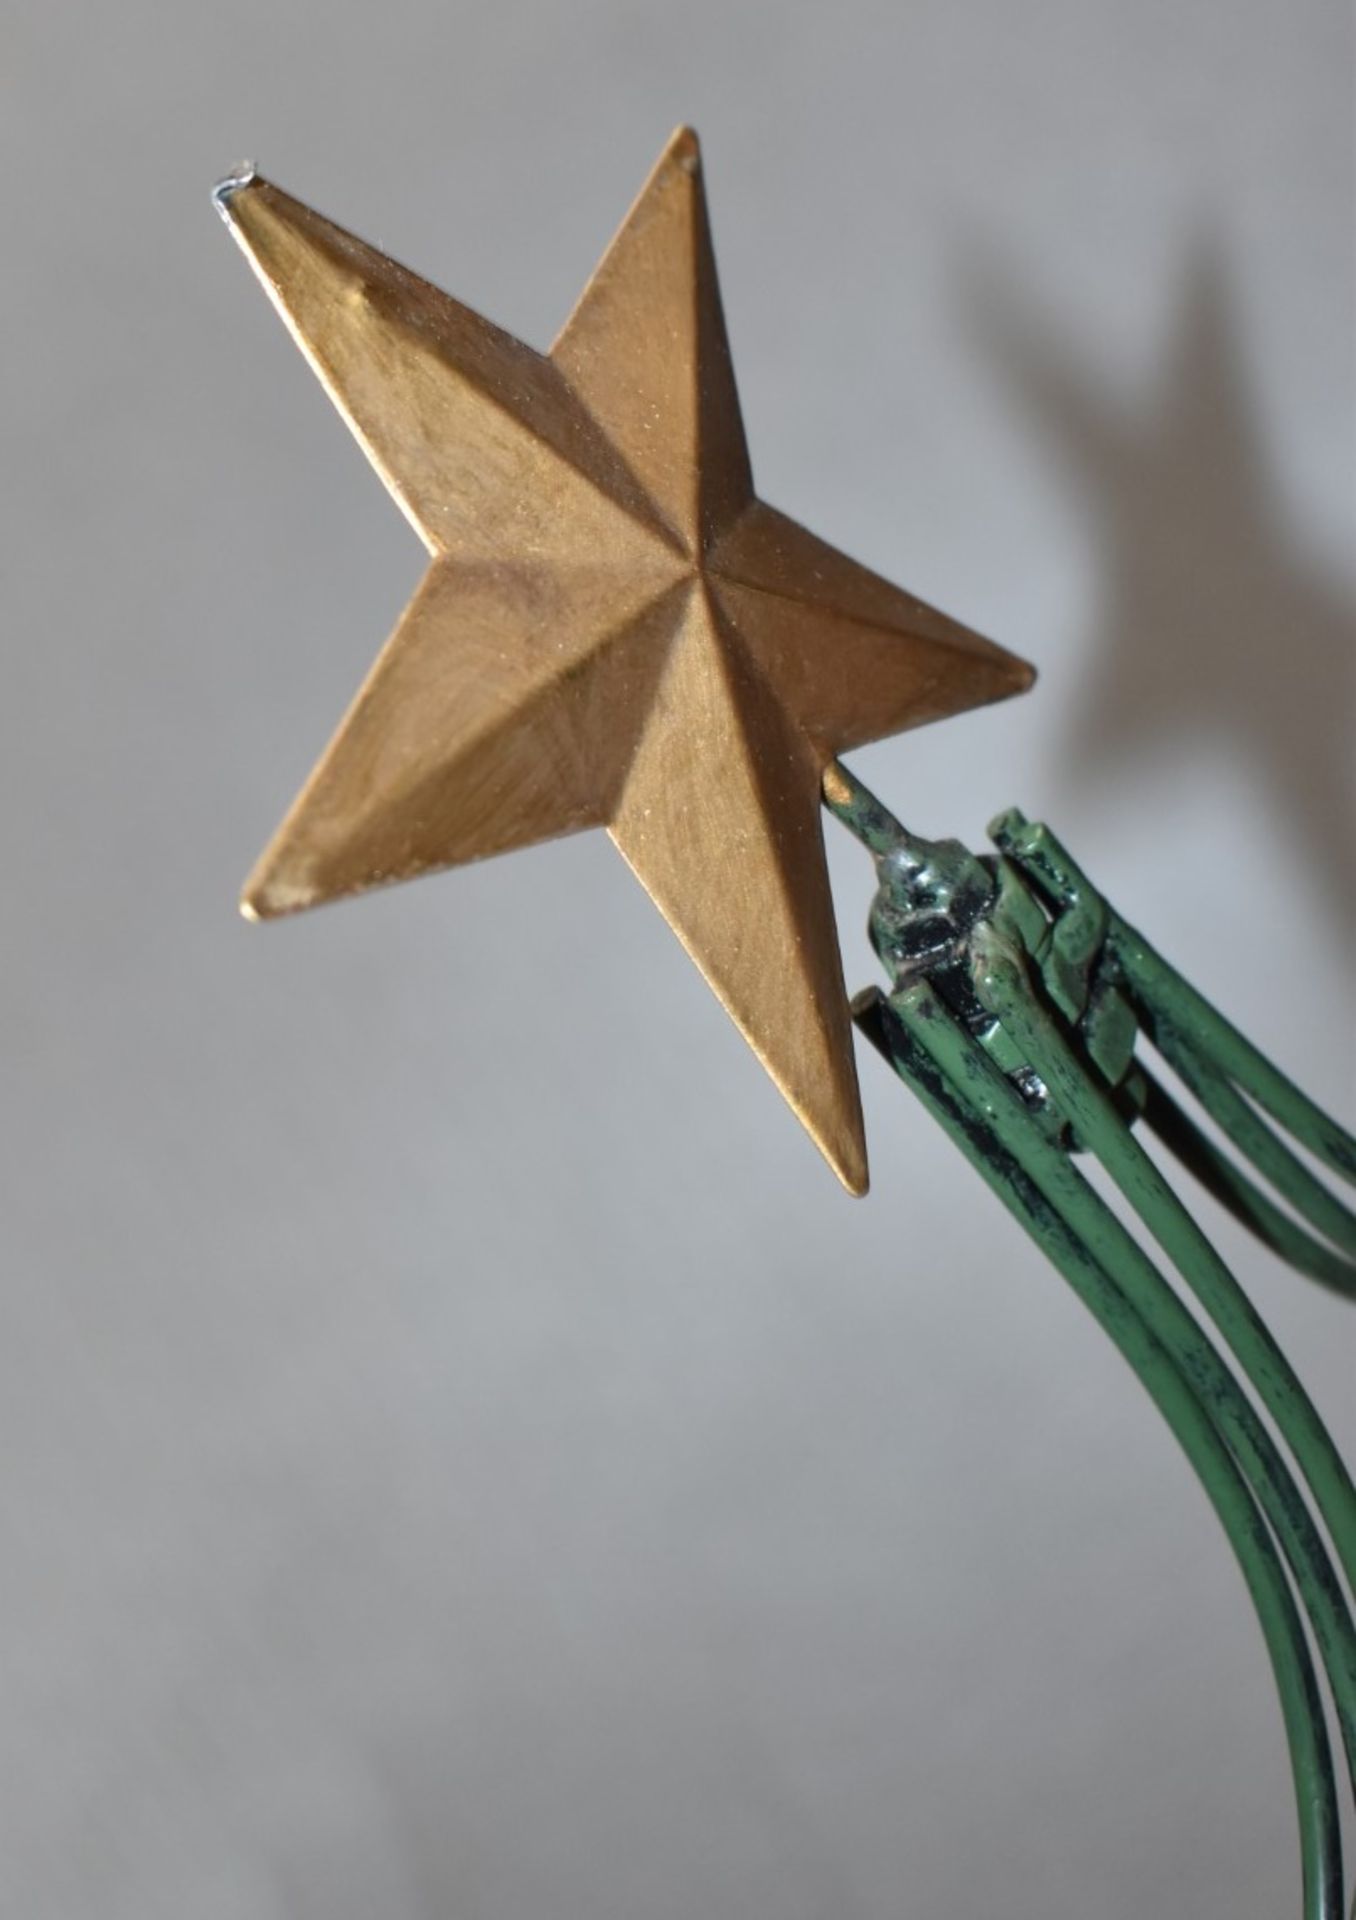 1 x SHISHI Decorative Star-topped Metal Christmas Tree (94cm) - Original Price £145.00 - Unboxed - Image 4 of 6